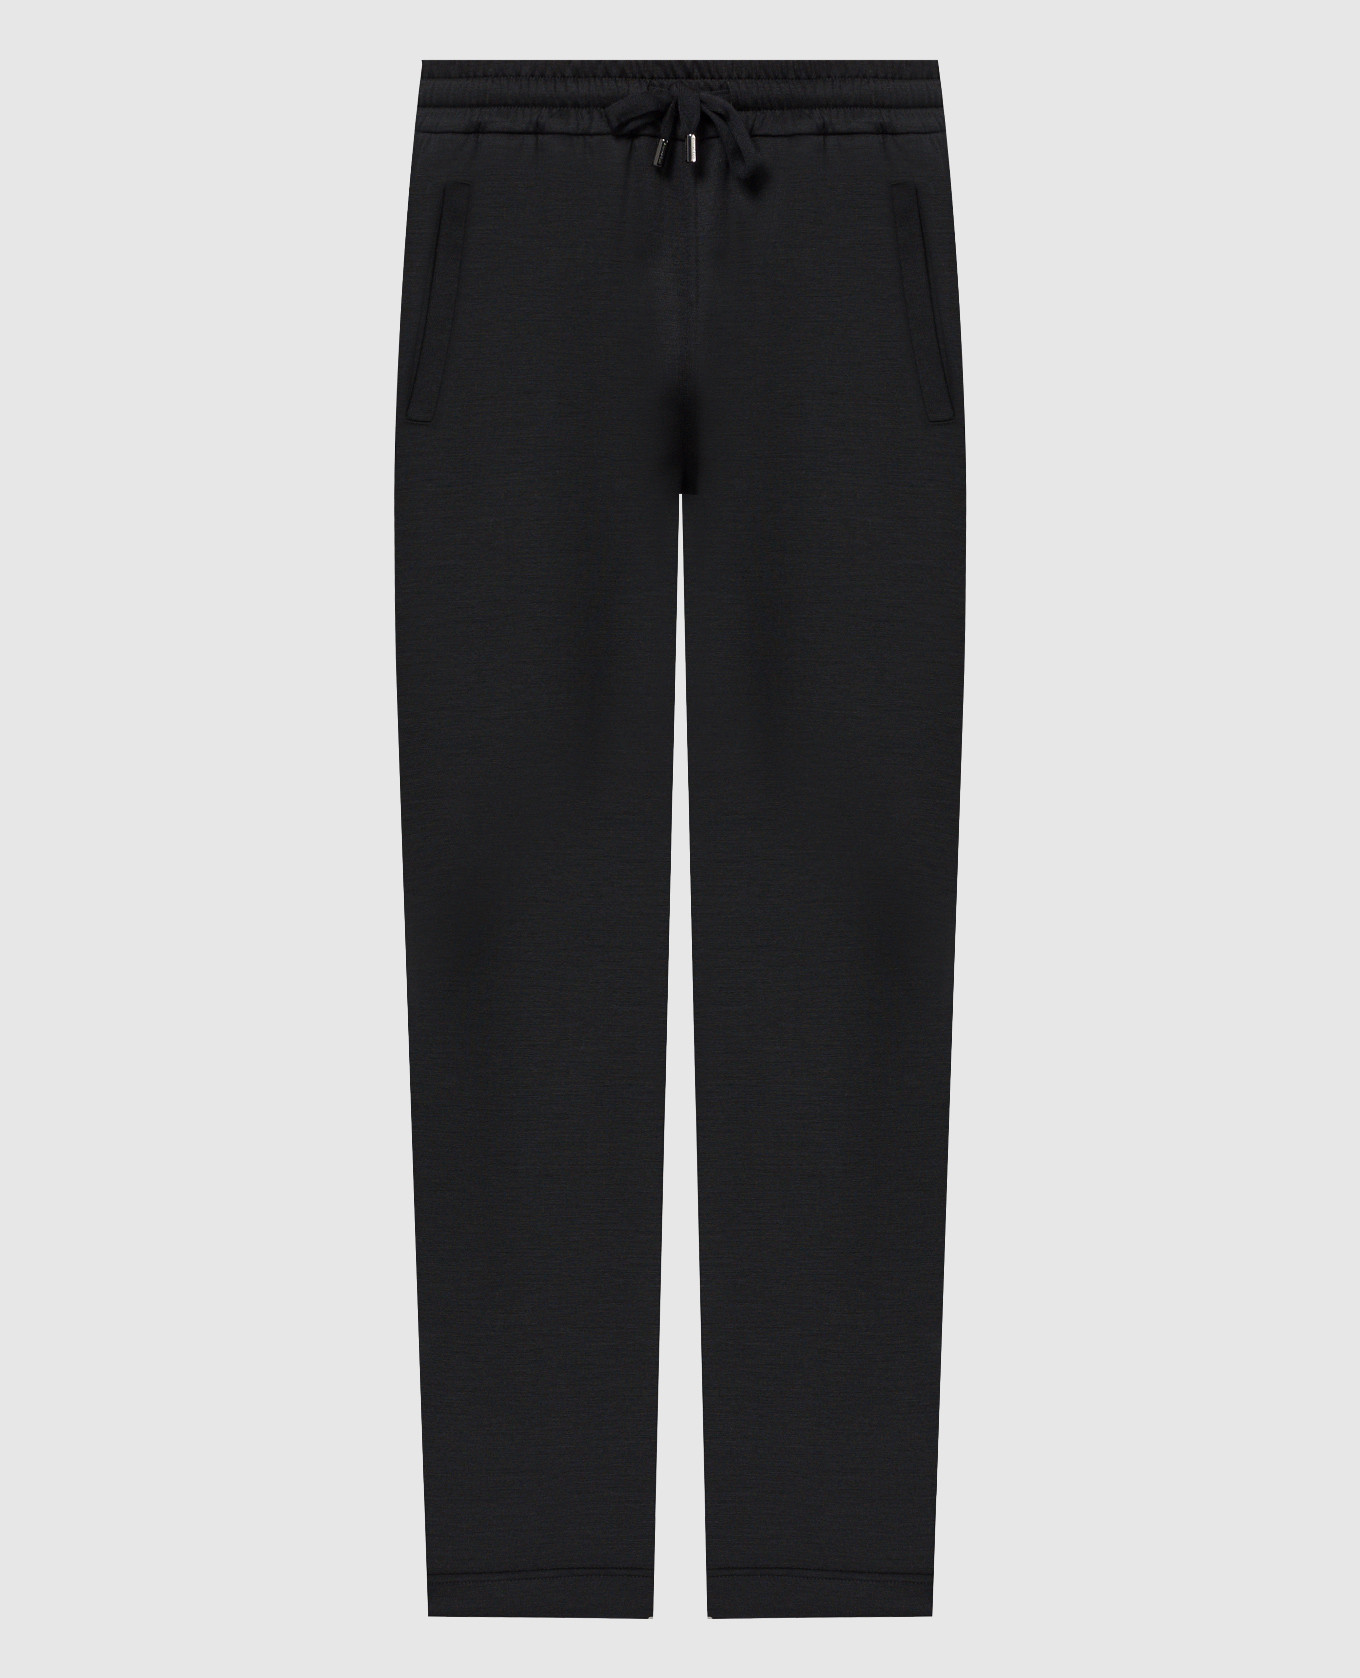 Black sweatpants with textured logo wool